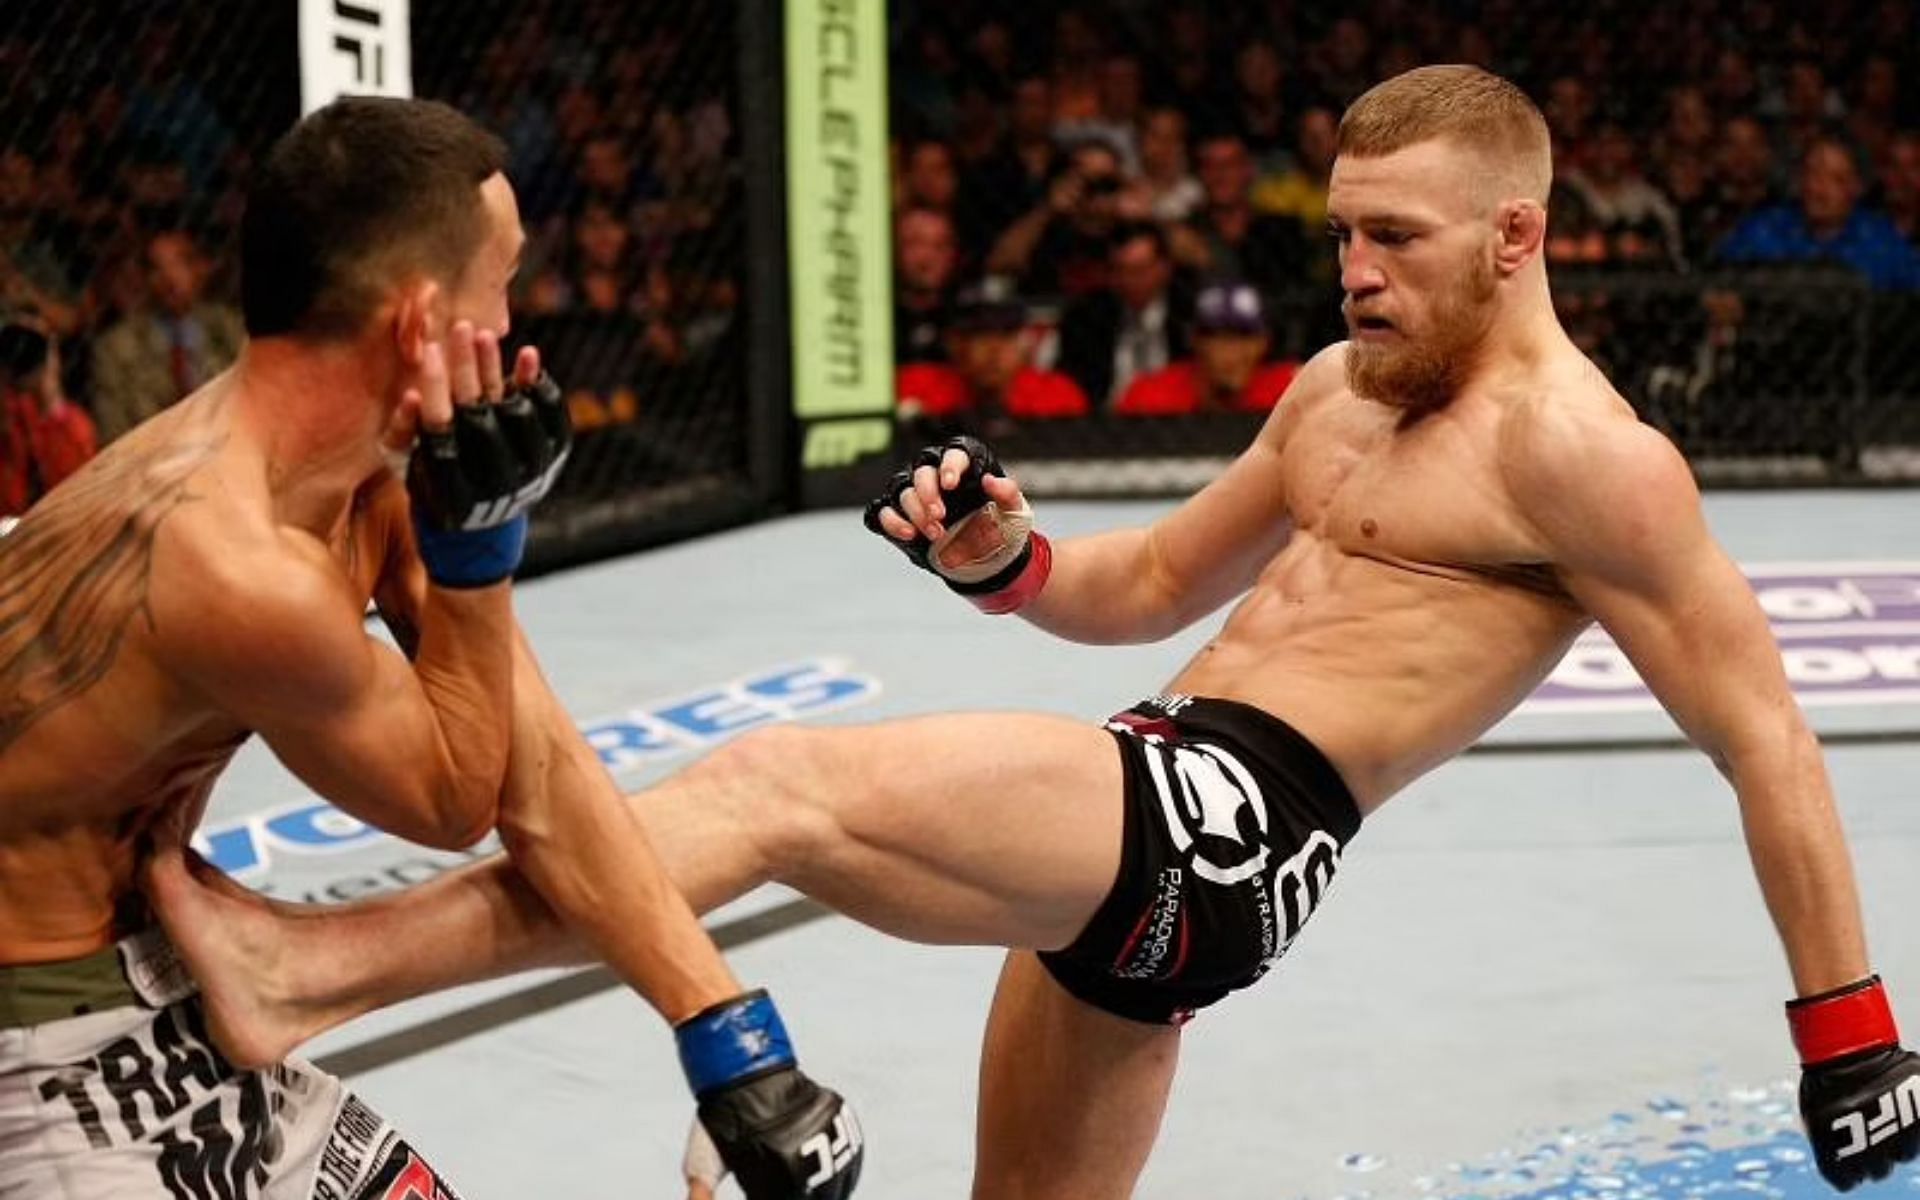 Conor McGregor fought Max Holloway back in 2013